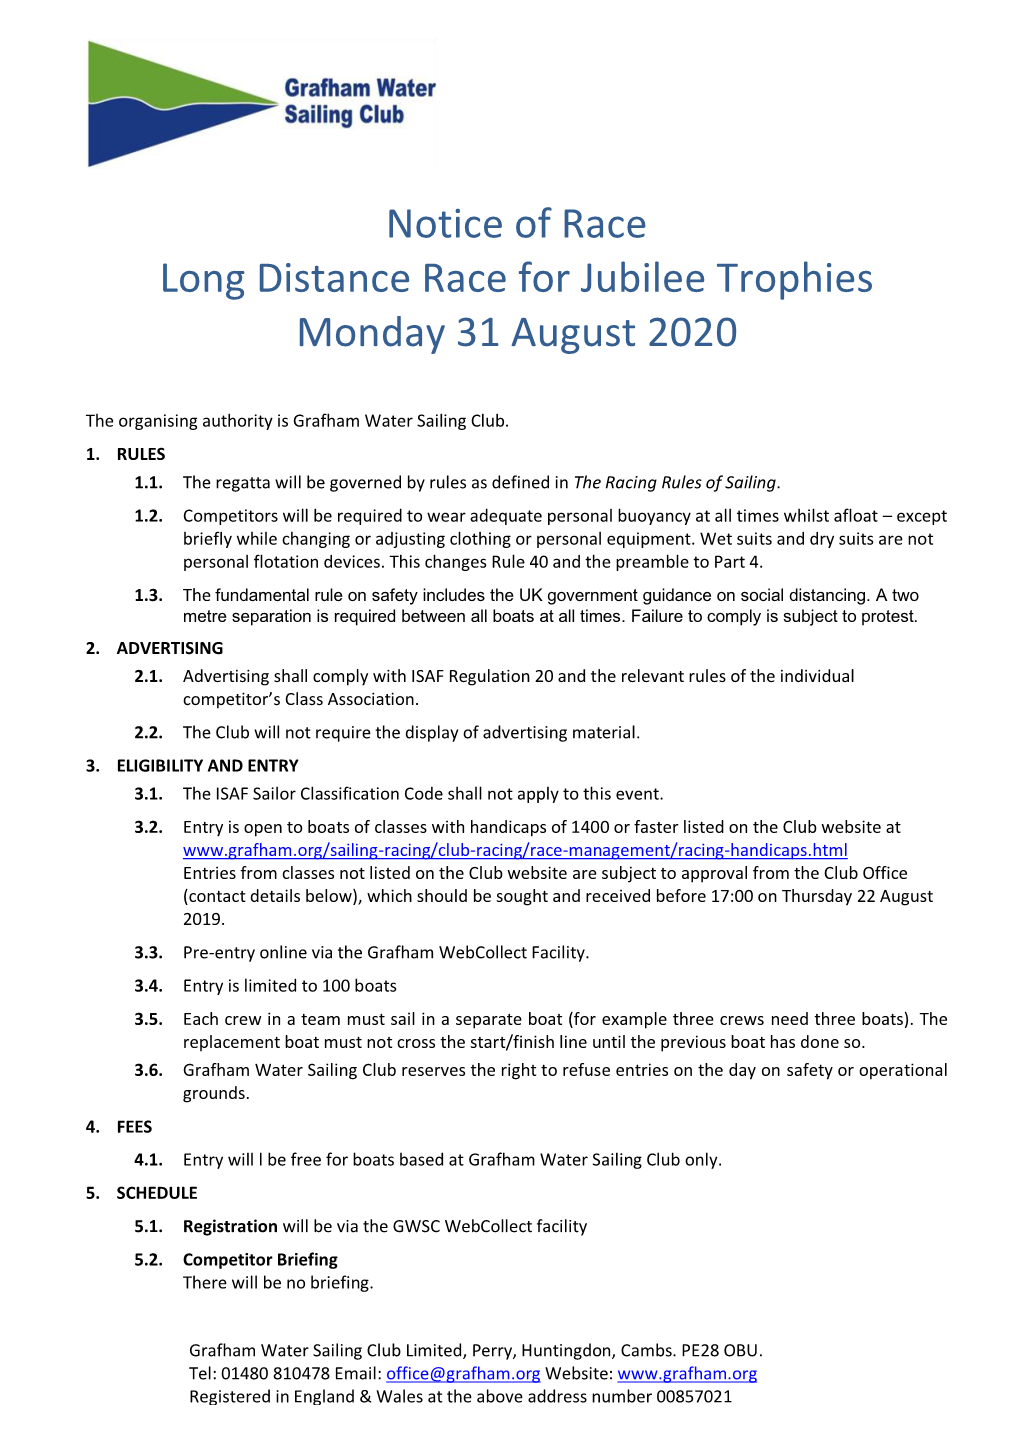 Notice of Race Long Distance Race for Jubilee Trophies Monday 31 August 2020